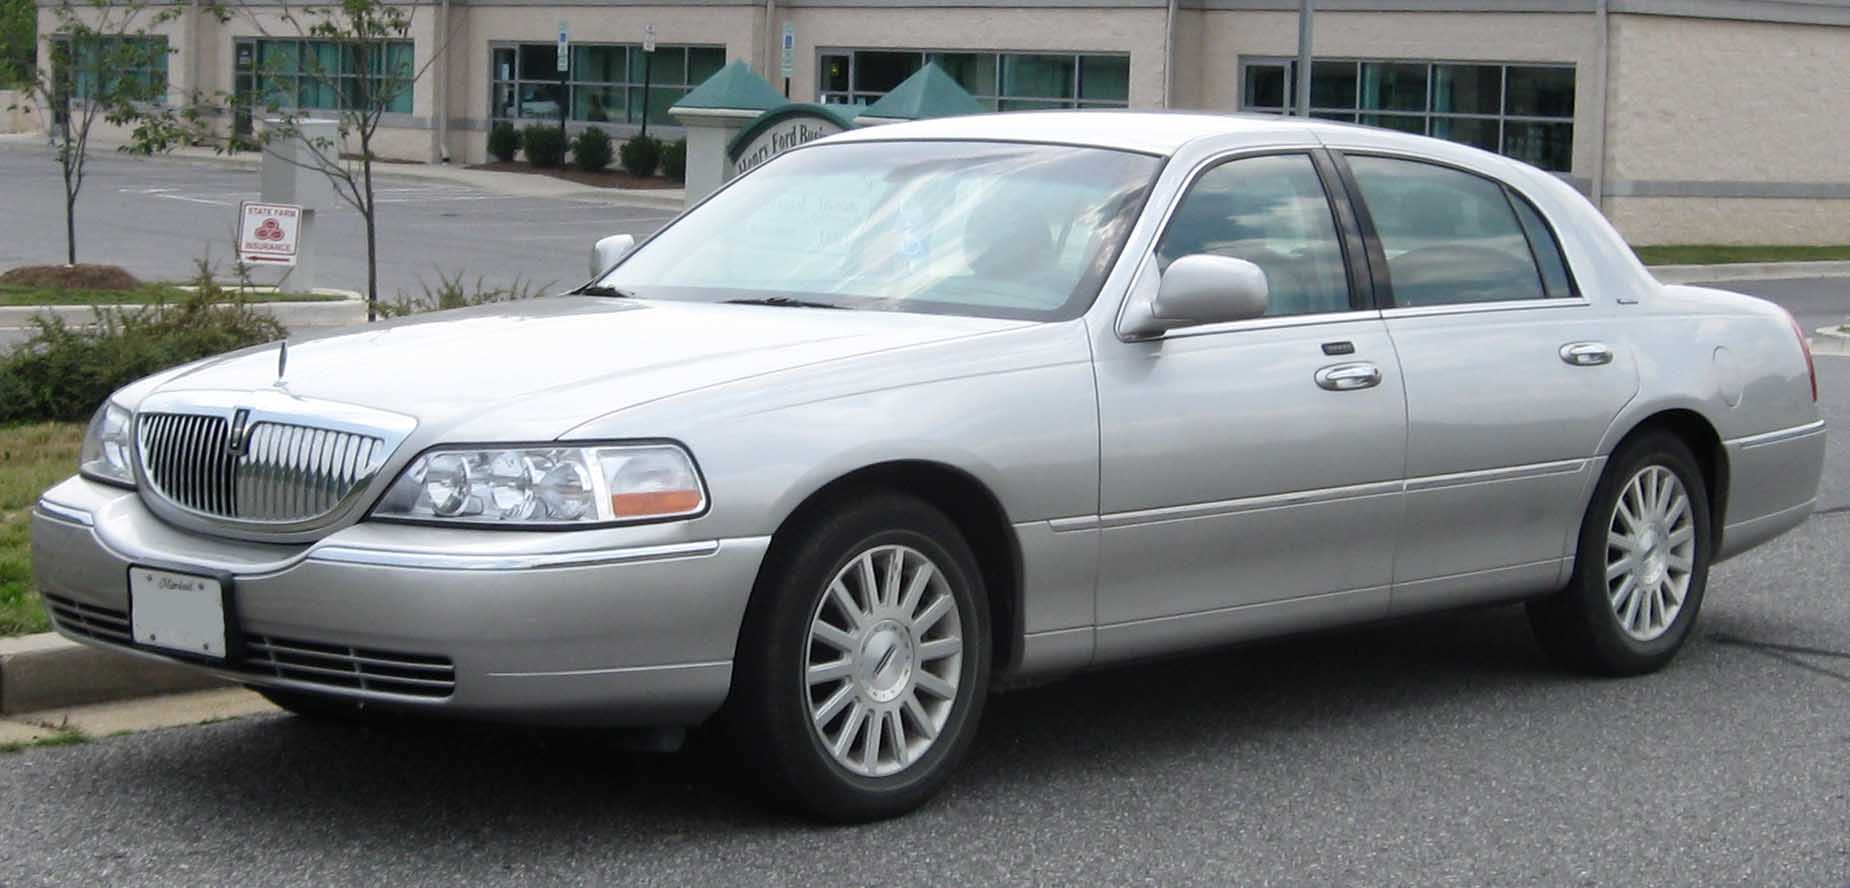 2003-2008 Lincoln Town Car photographed in Waldorf, Maryland, USA.